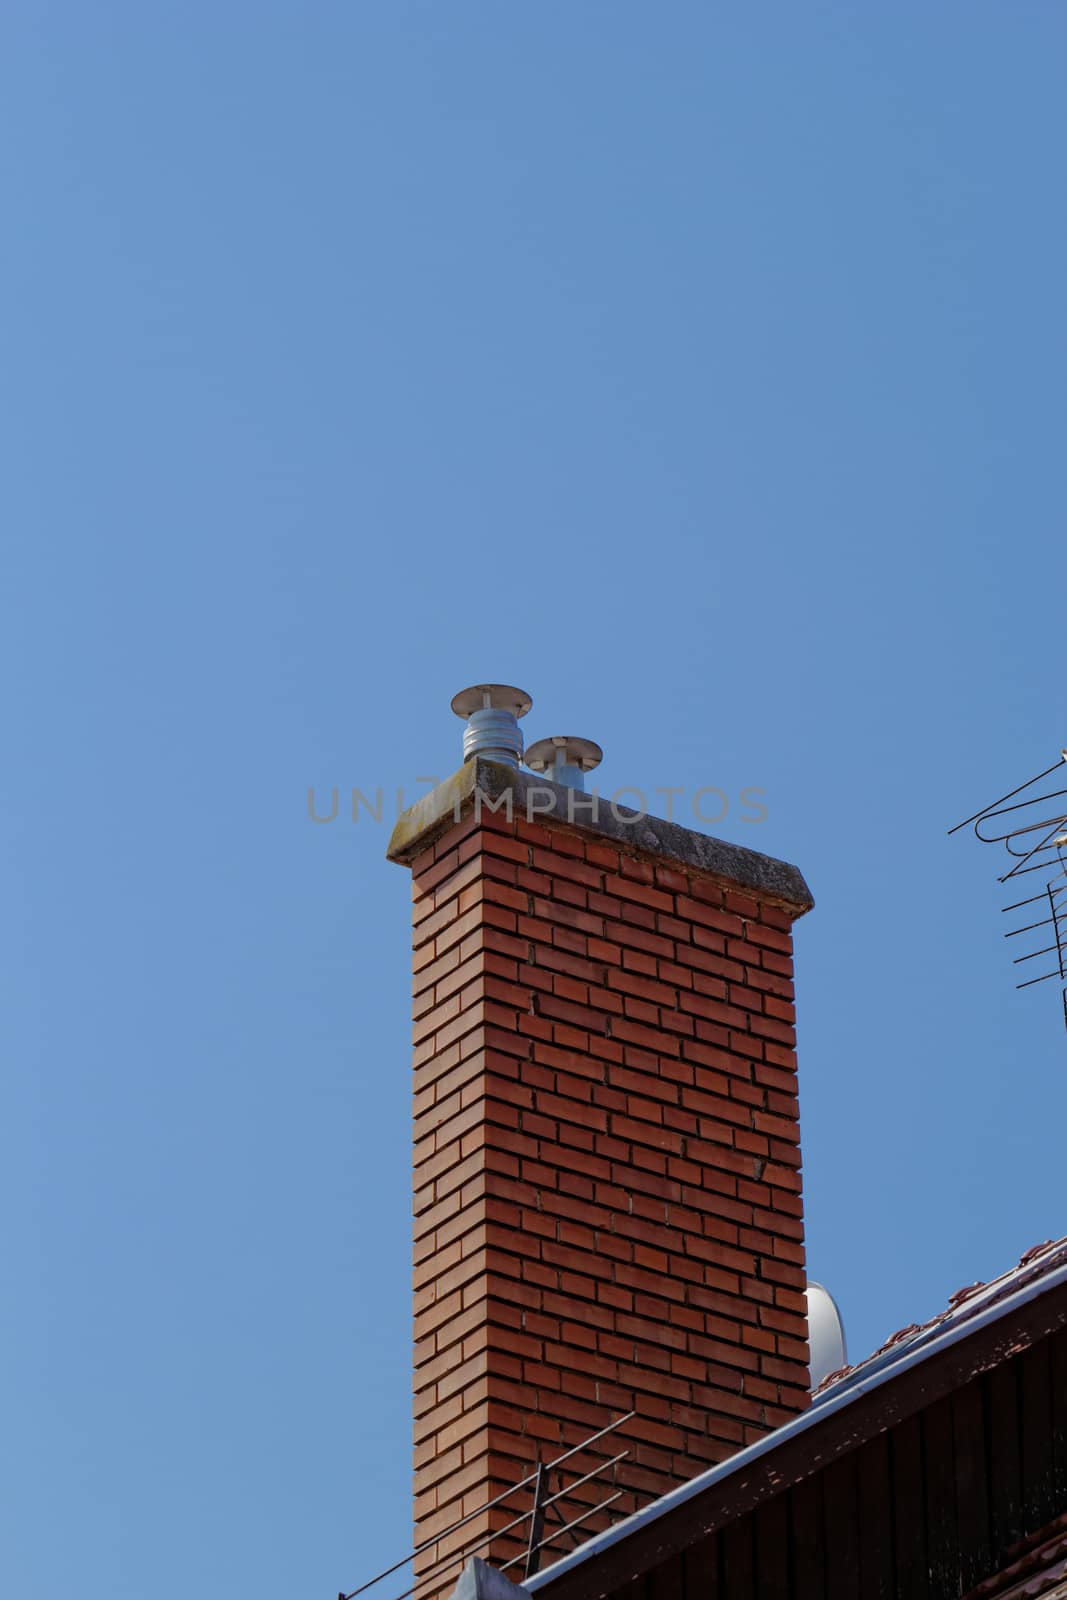 chimney on the roof